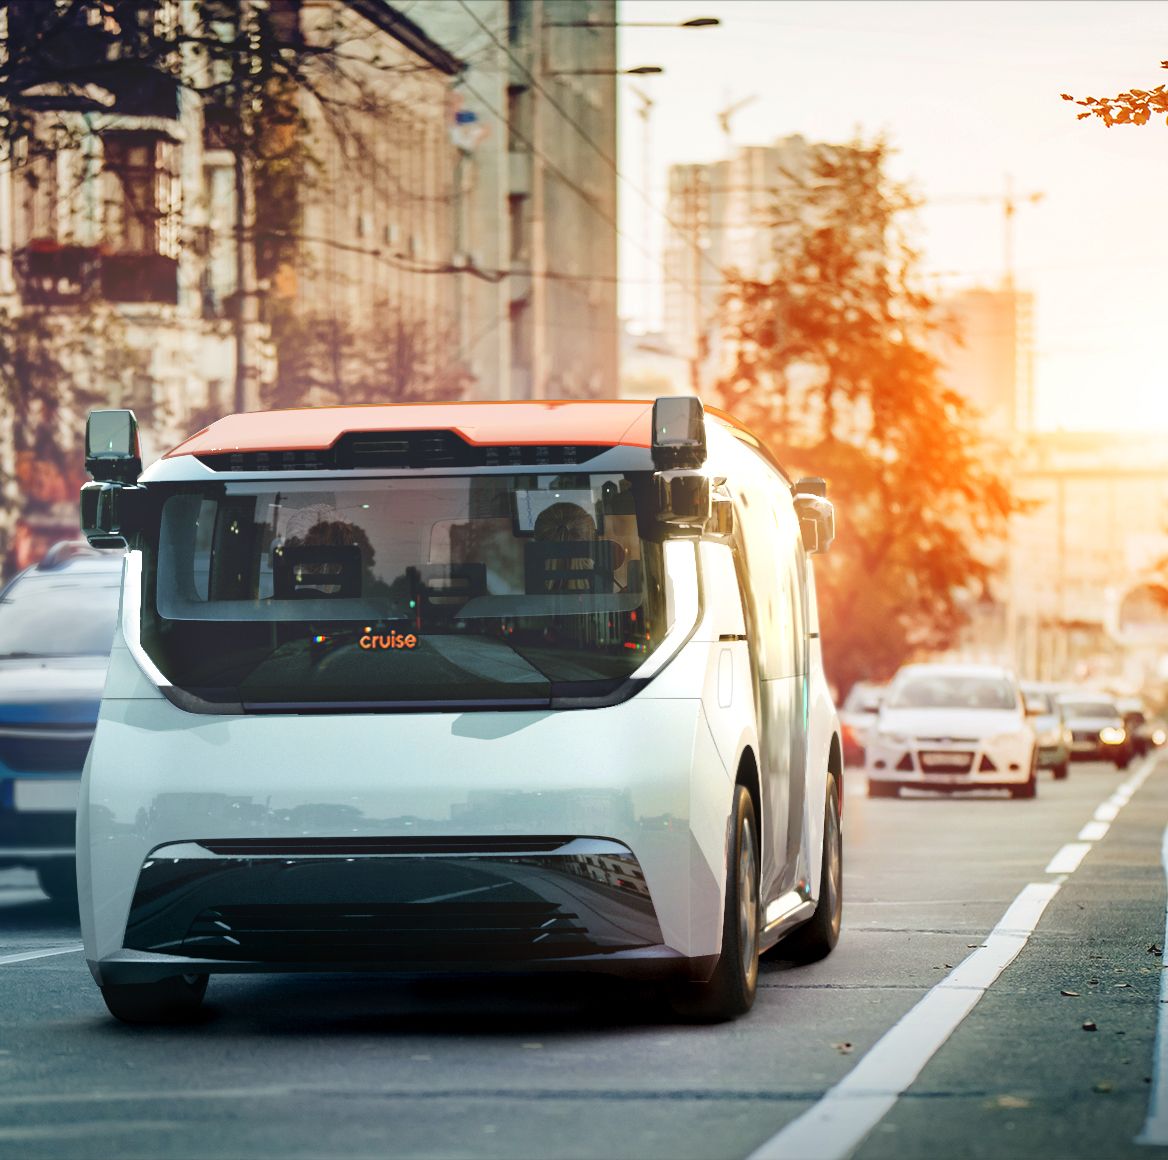 Honda and GM Have Ambitious Plans to Launch Robotaxis in a Major City